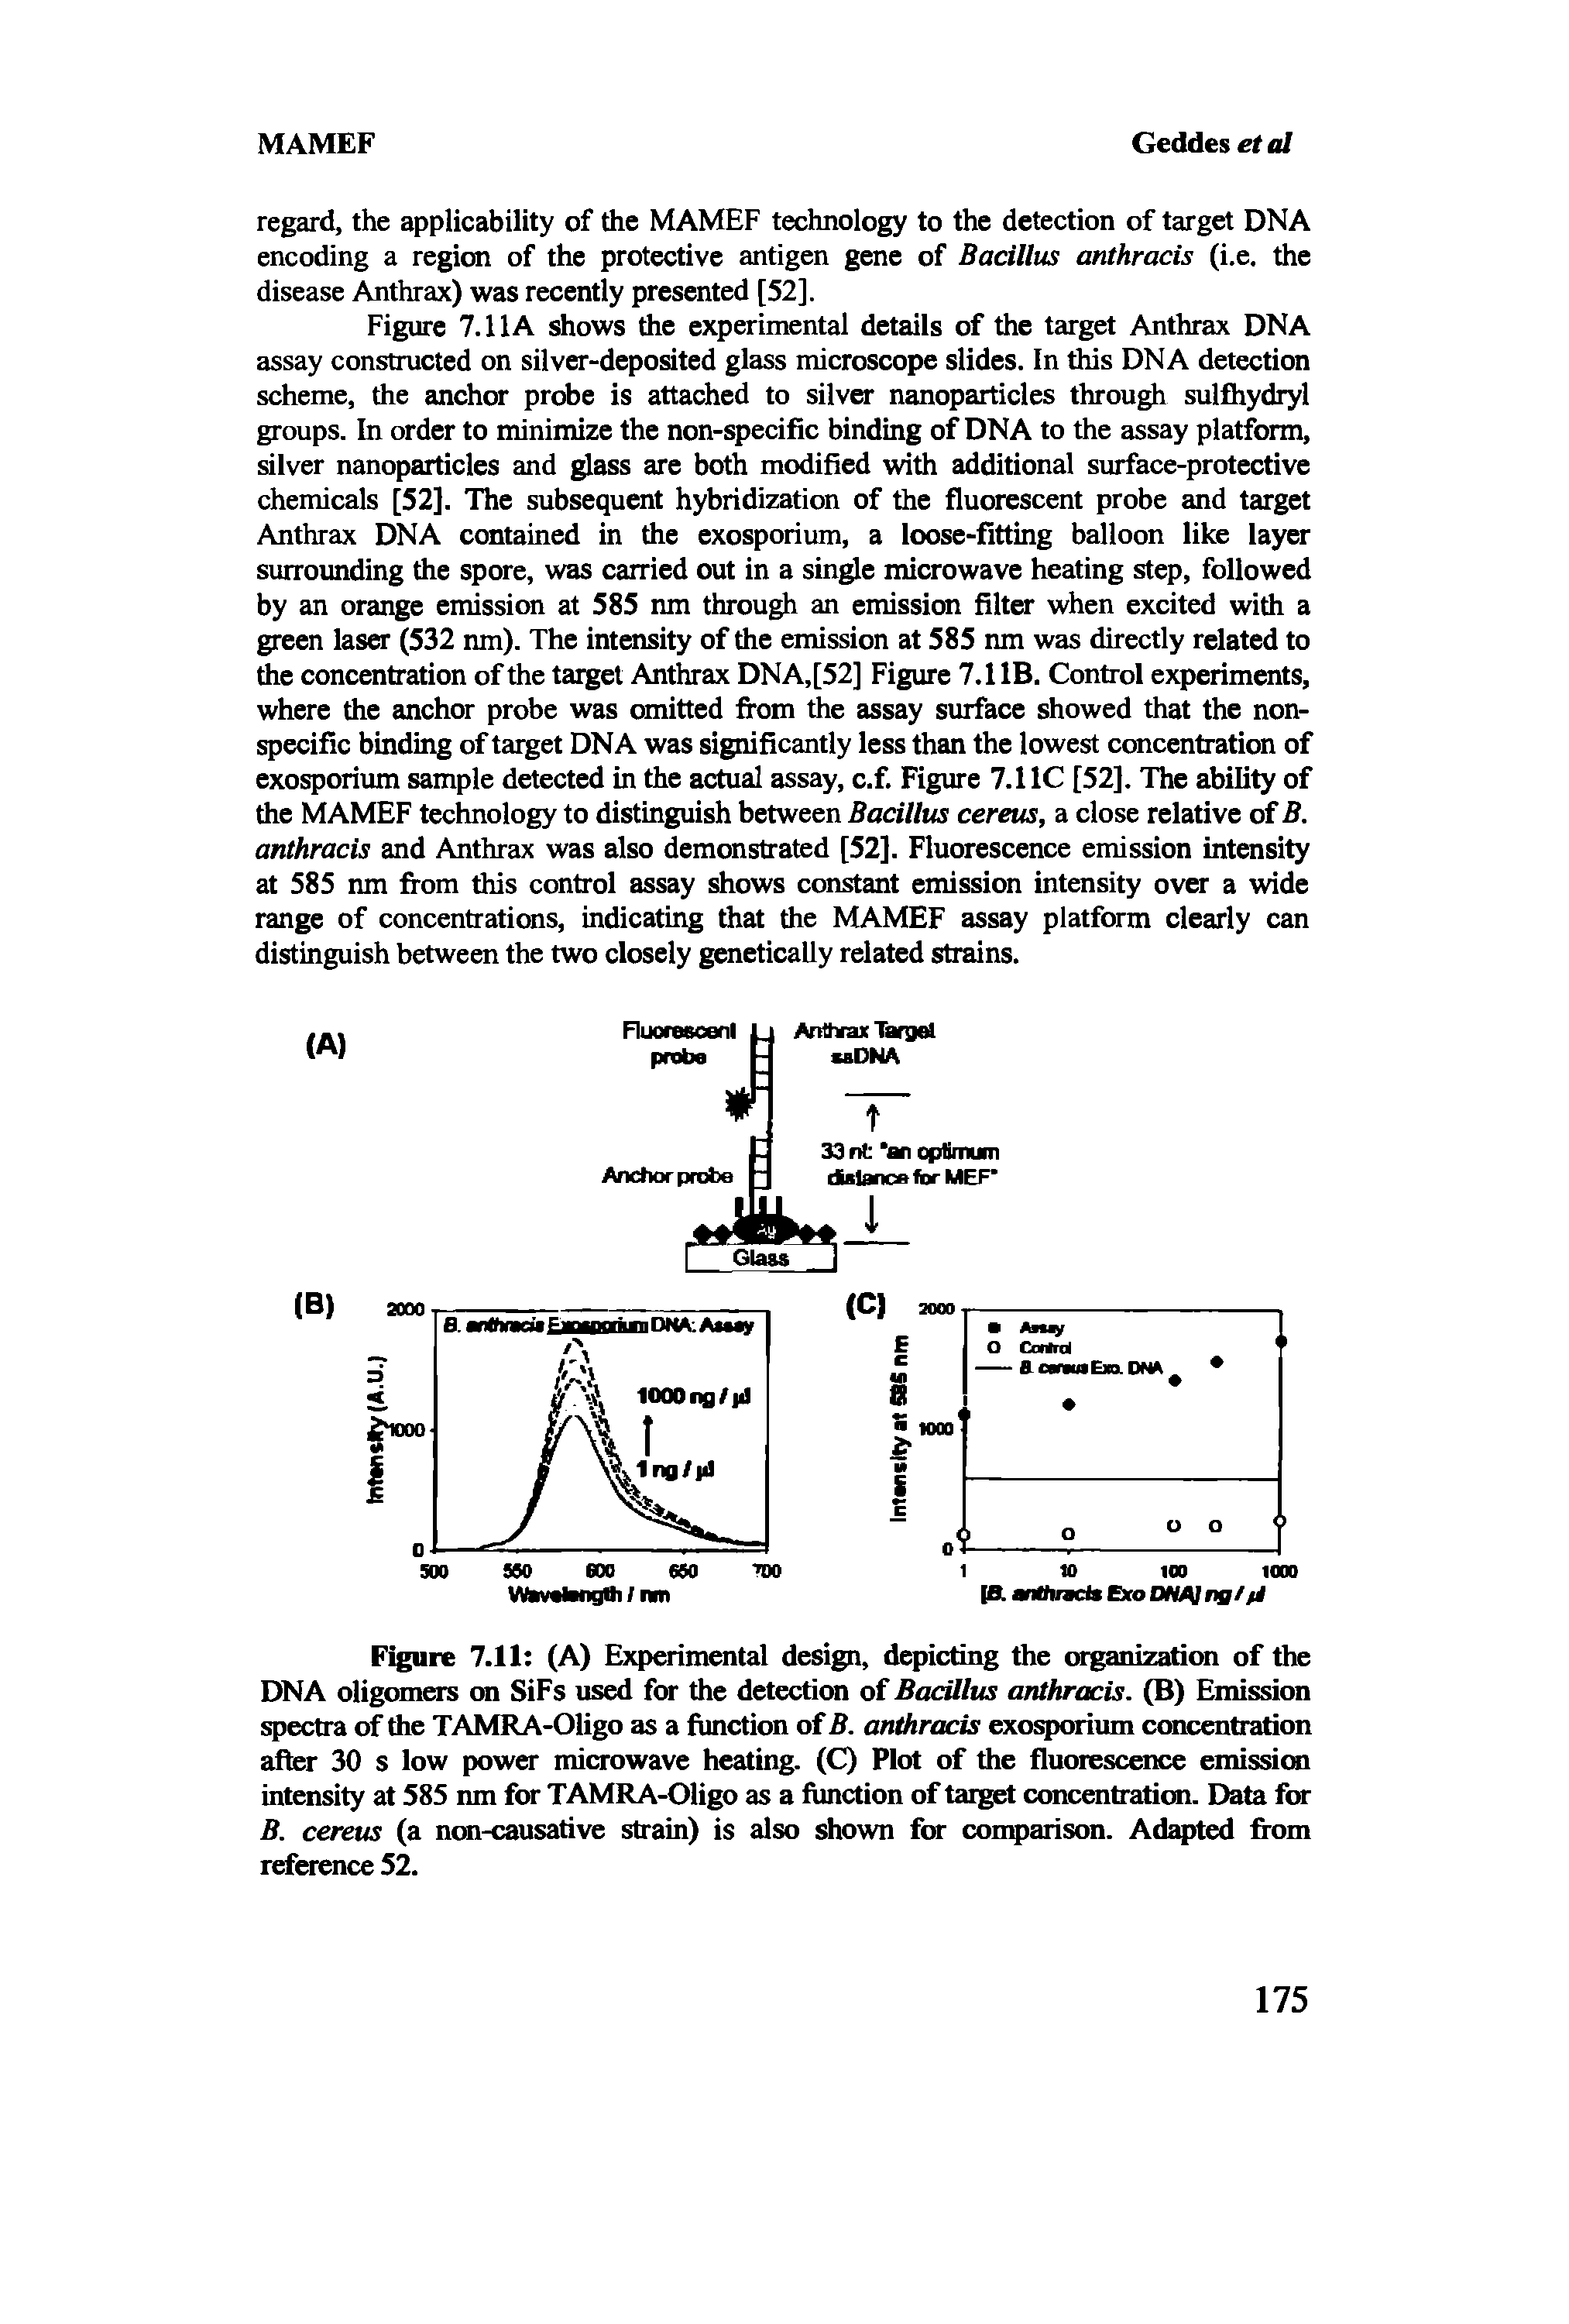 Figure 7.11 (A) Experimental design, depicting the organization of the DNA oligomers on SiFs used for the detection of Bacillus anthracis. (B) Emission spectra of the TAMRA-Oligo as a function of B. anthracis exosporium concentration after 30 s low power microwave heating. (C) Plot of the fluorescence emissicm intensity at 585 tun for TAMRA-Oligo as a function of target concentration. Data for B. cereus (a non-causative strain) is also shown for con arison. Ad ed fi-om reference 52.